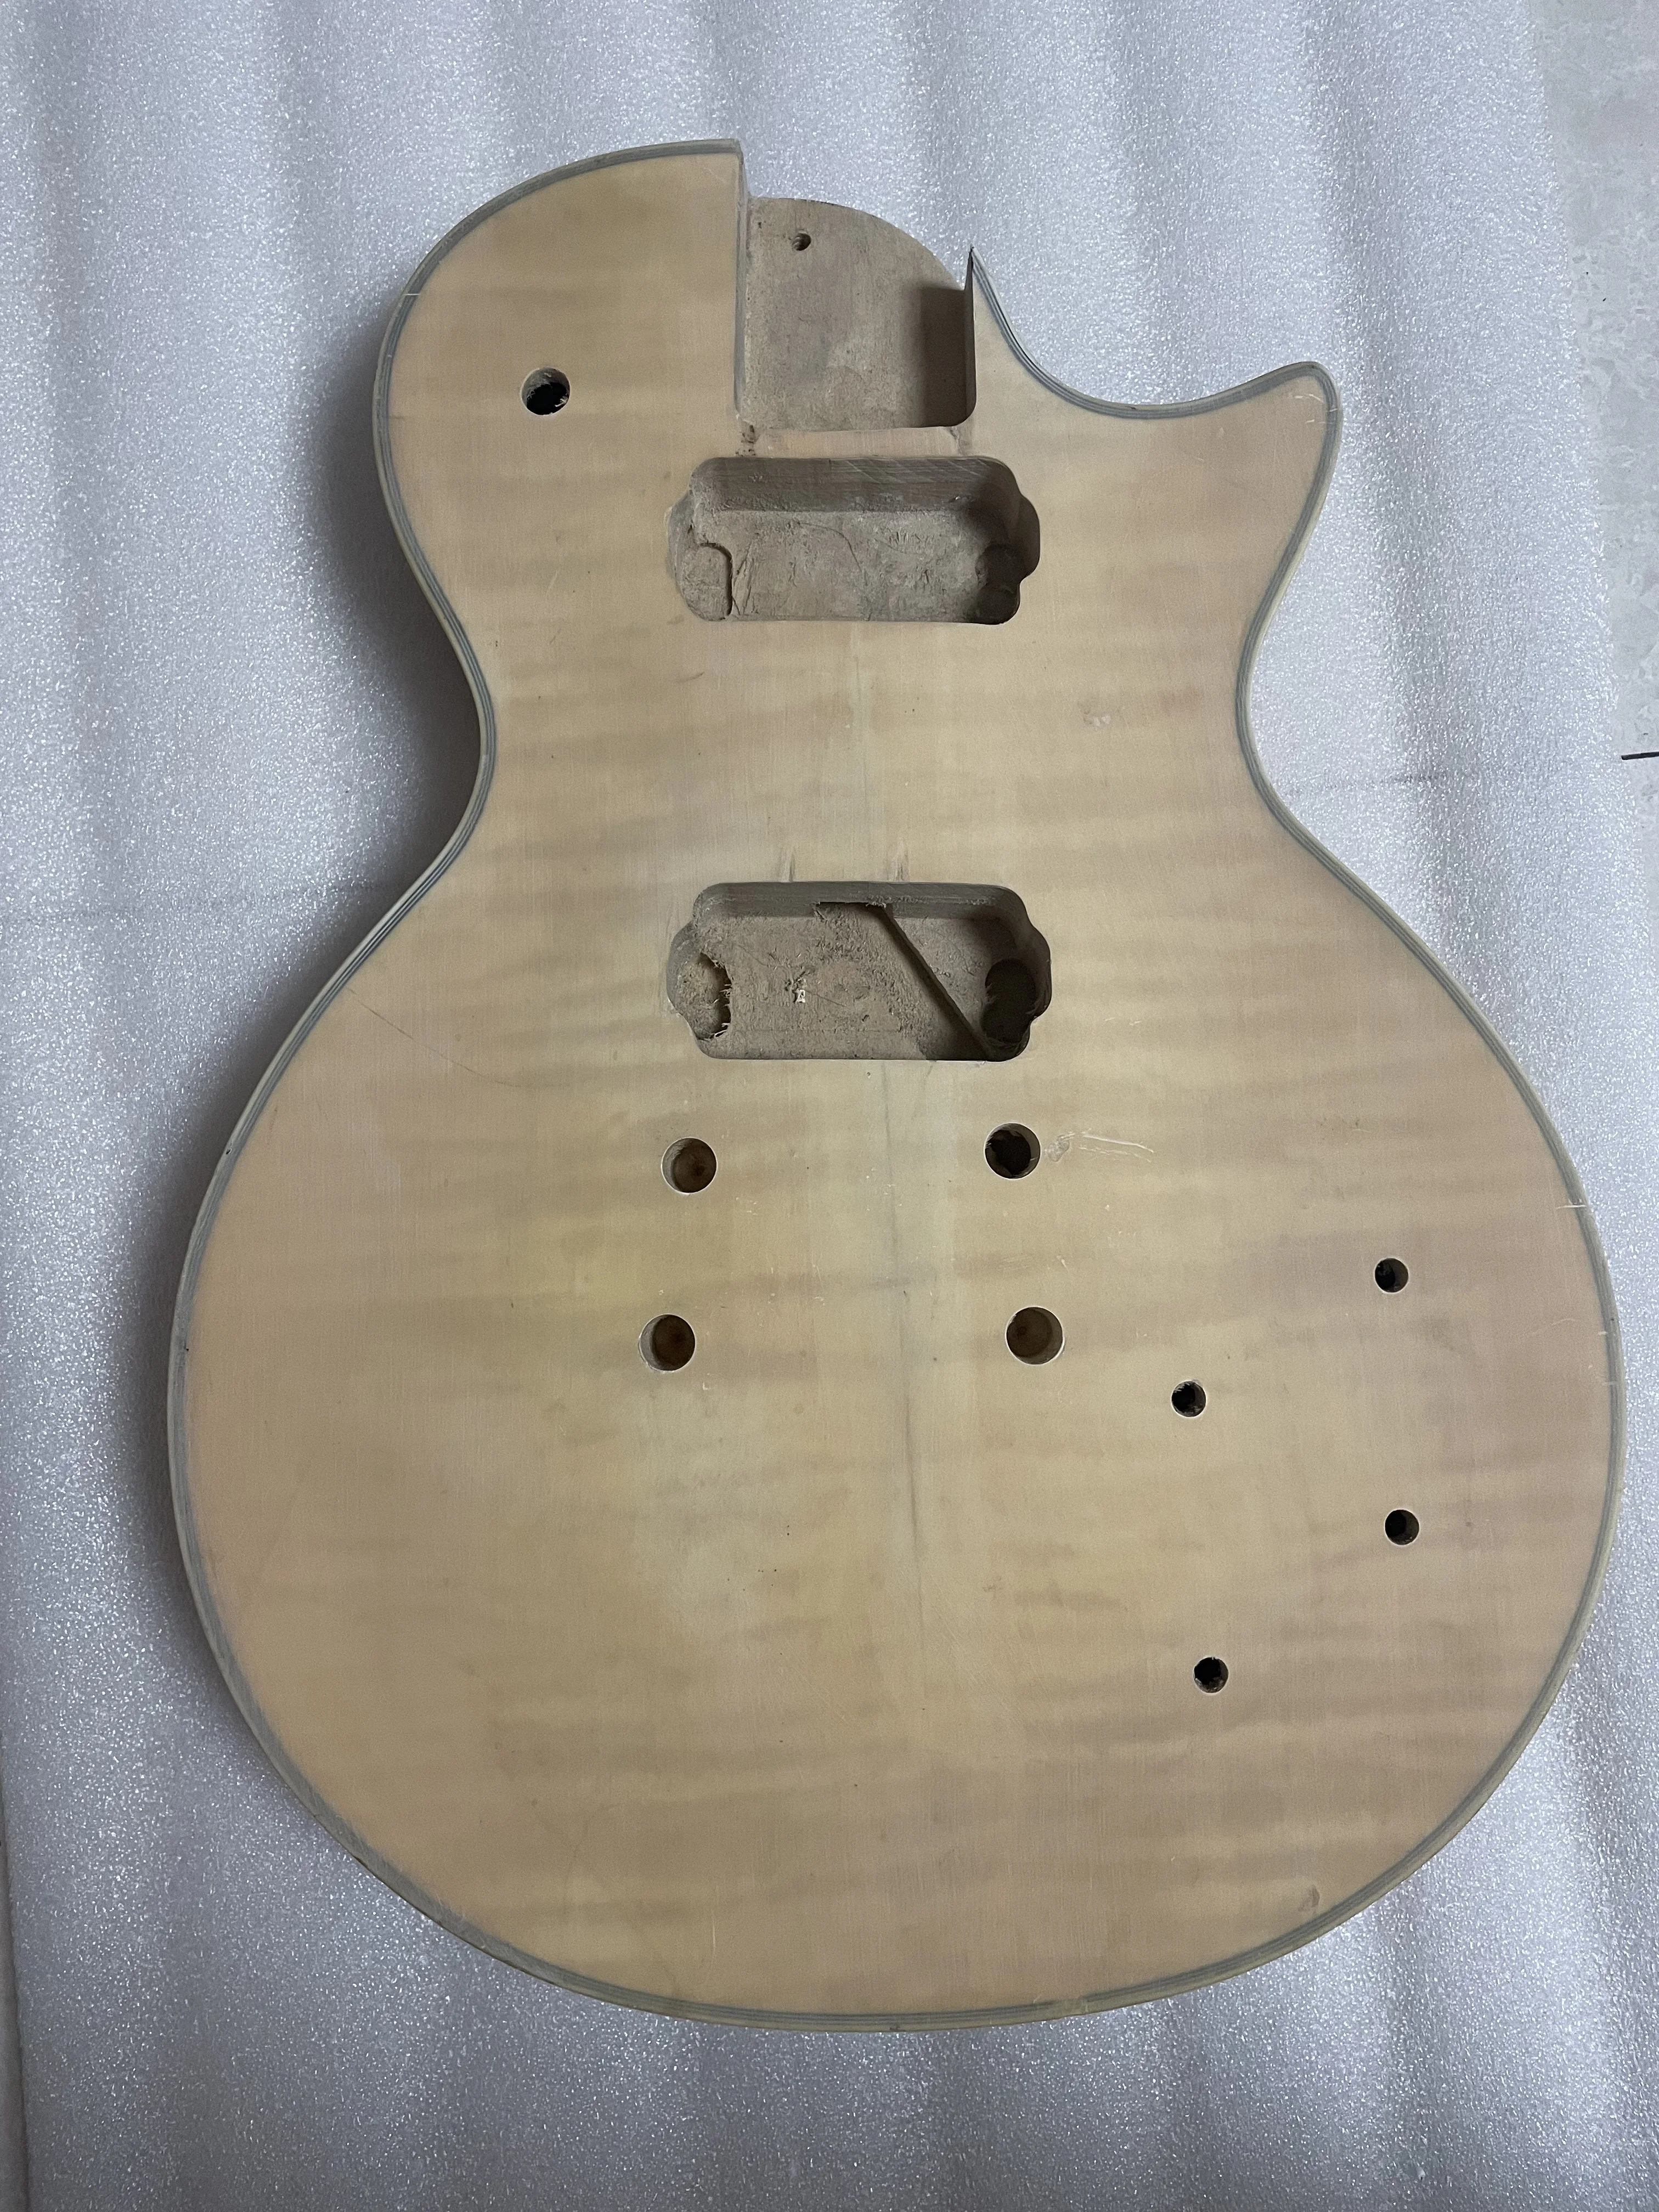 Unfinished Stock LP Style Electric Guitar Body Mahogany Wood Guitar Kit Part DIY Gibson Style Guitar Barrel Guitar Parts enlarge